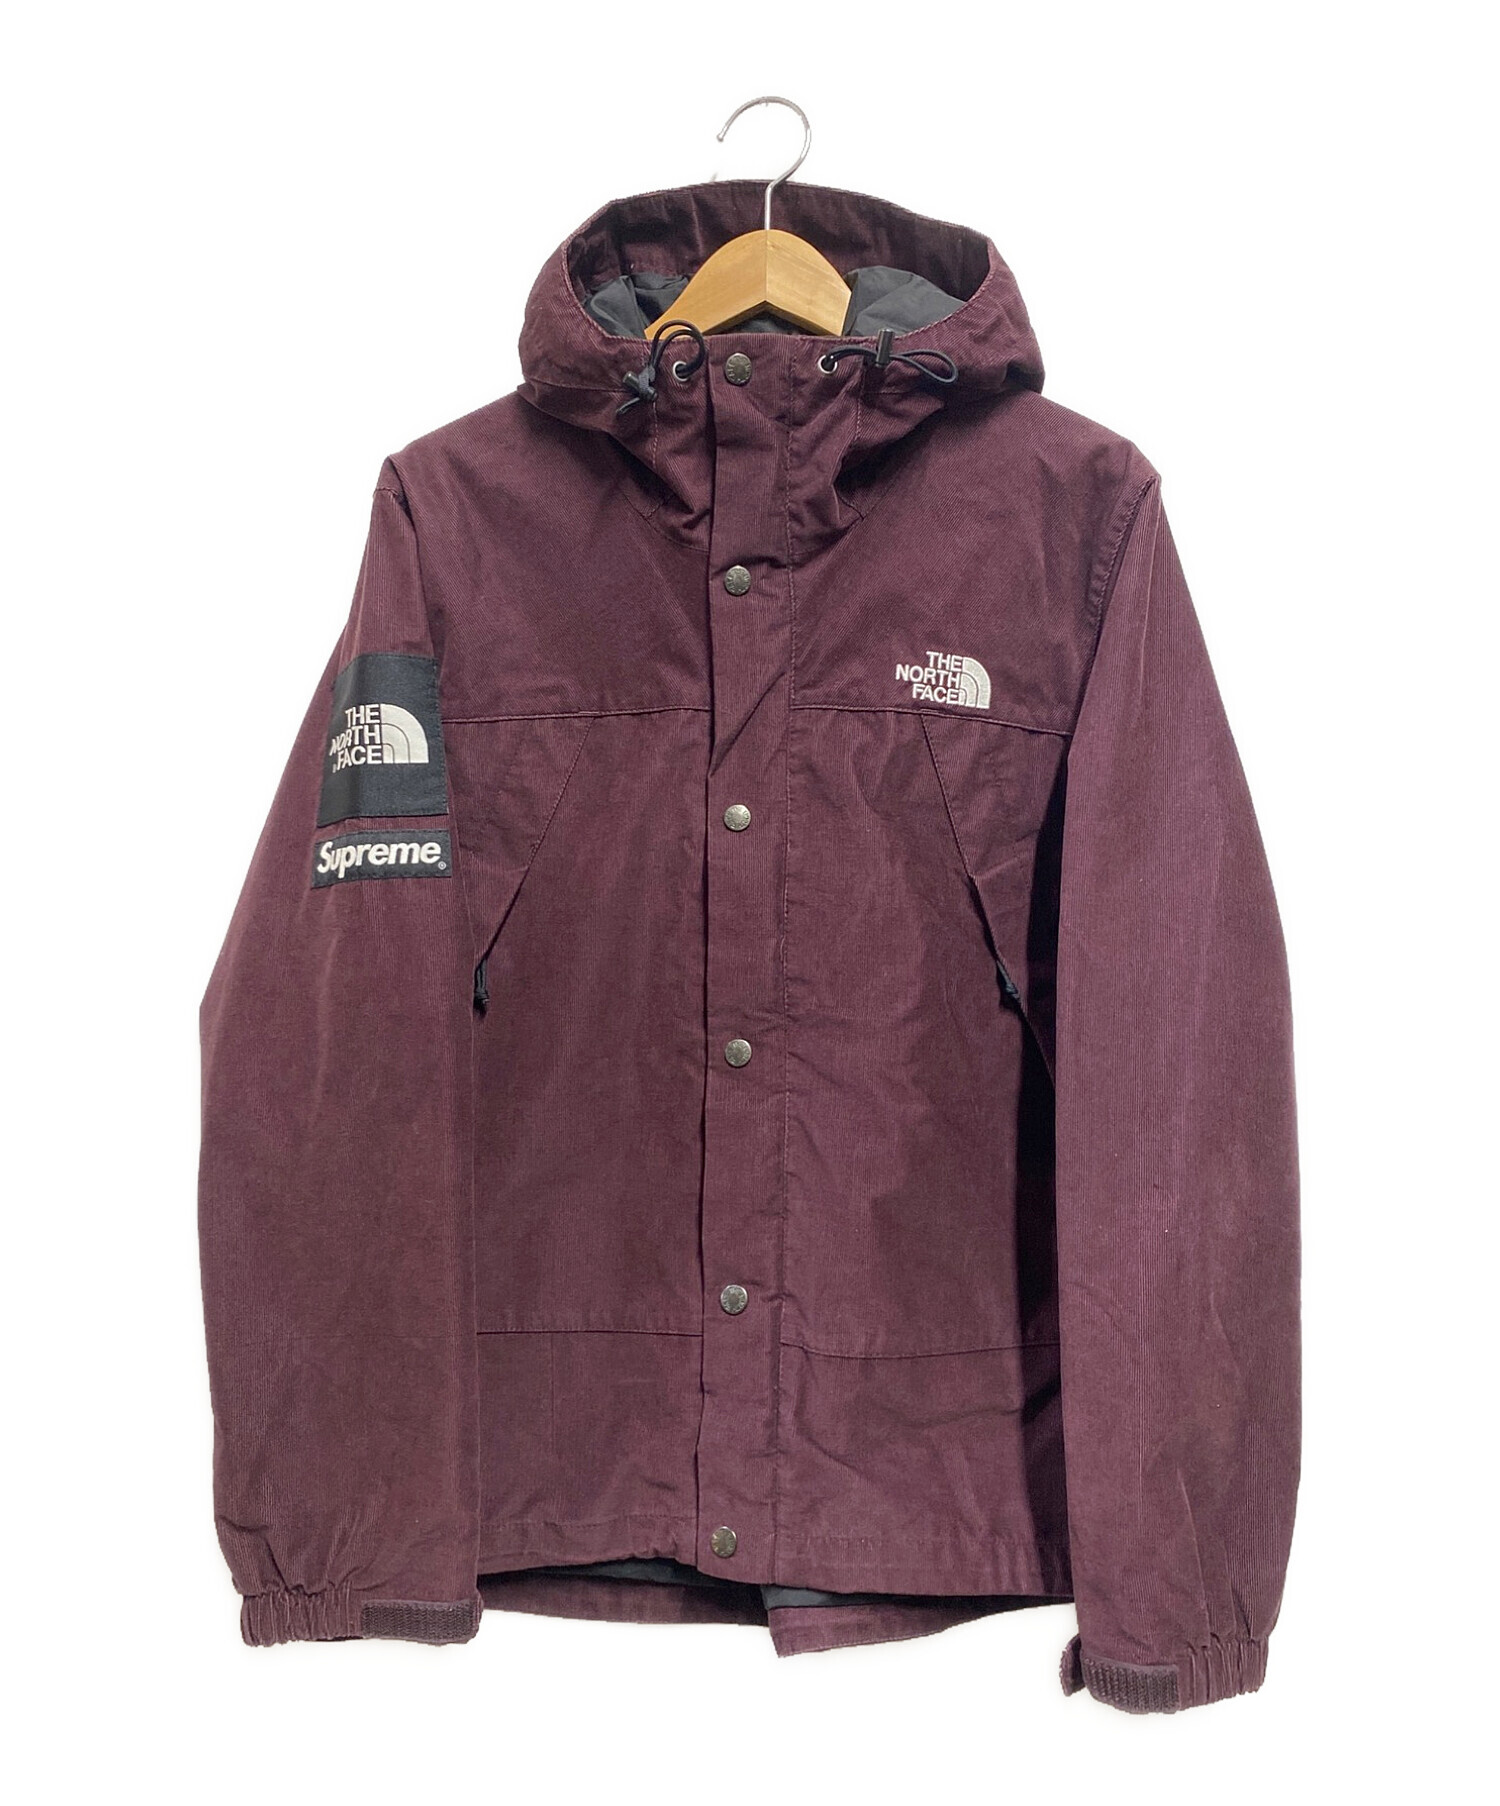 Supreme / The North Face Shell Jacket S希望は､49000円です